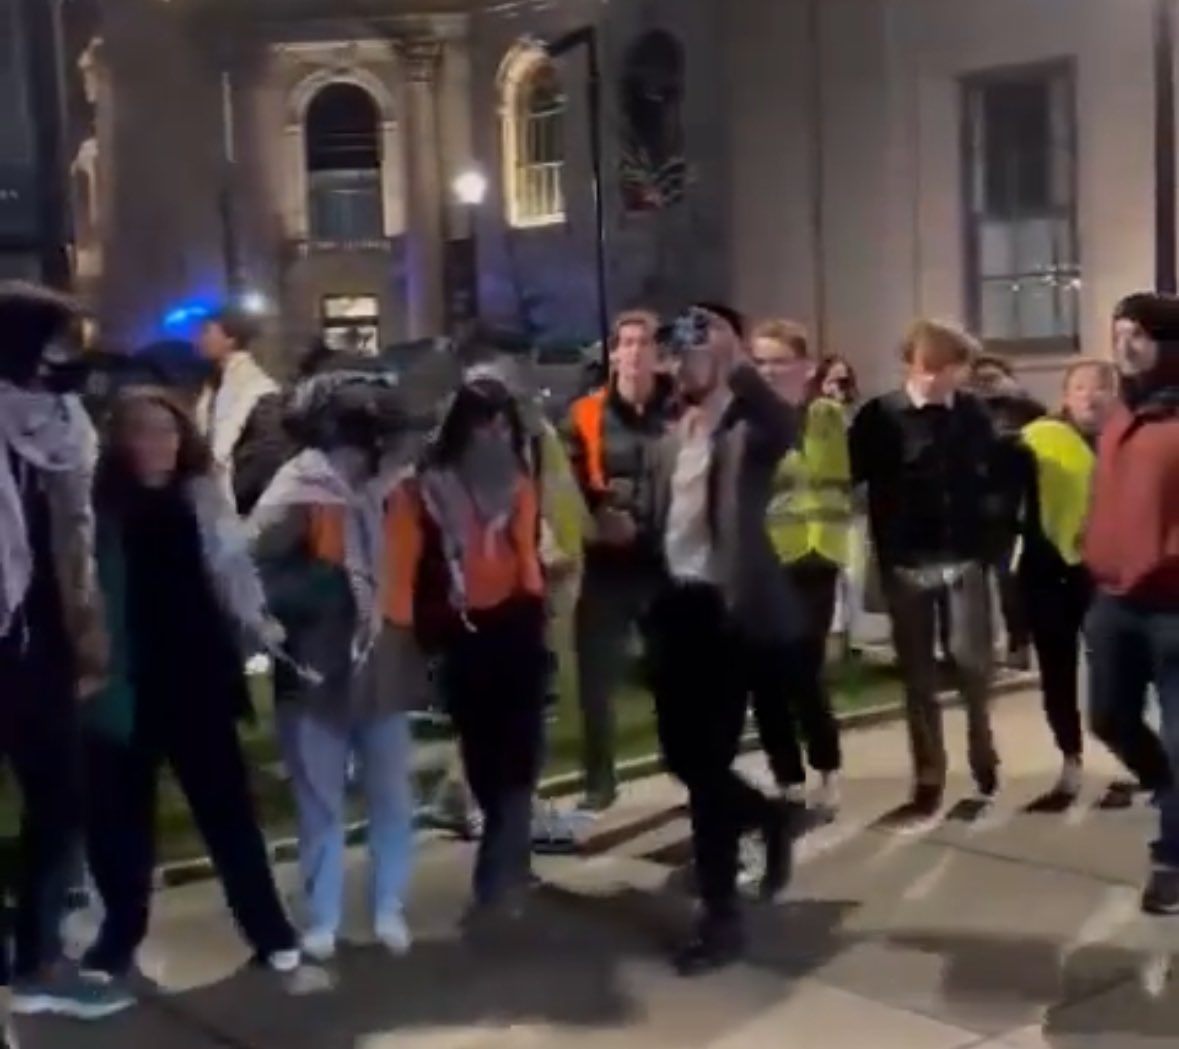 𝟏𝟗𝟔𝟑 White supremacists block a black woman from entering the University of Alabama. 𝟐𝟎𝟐𝟒 Palestinian activists block a Jewish man from entering the University of Yale.